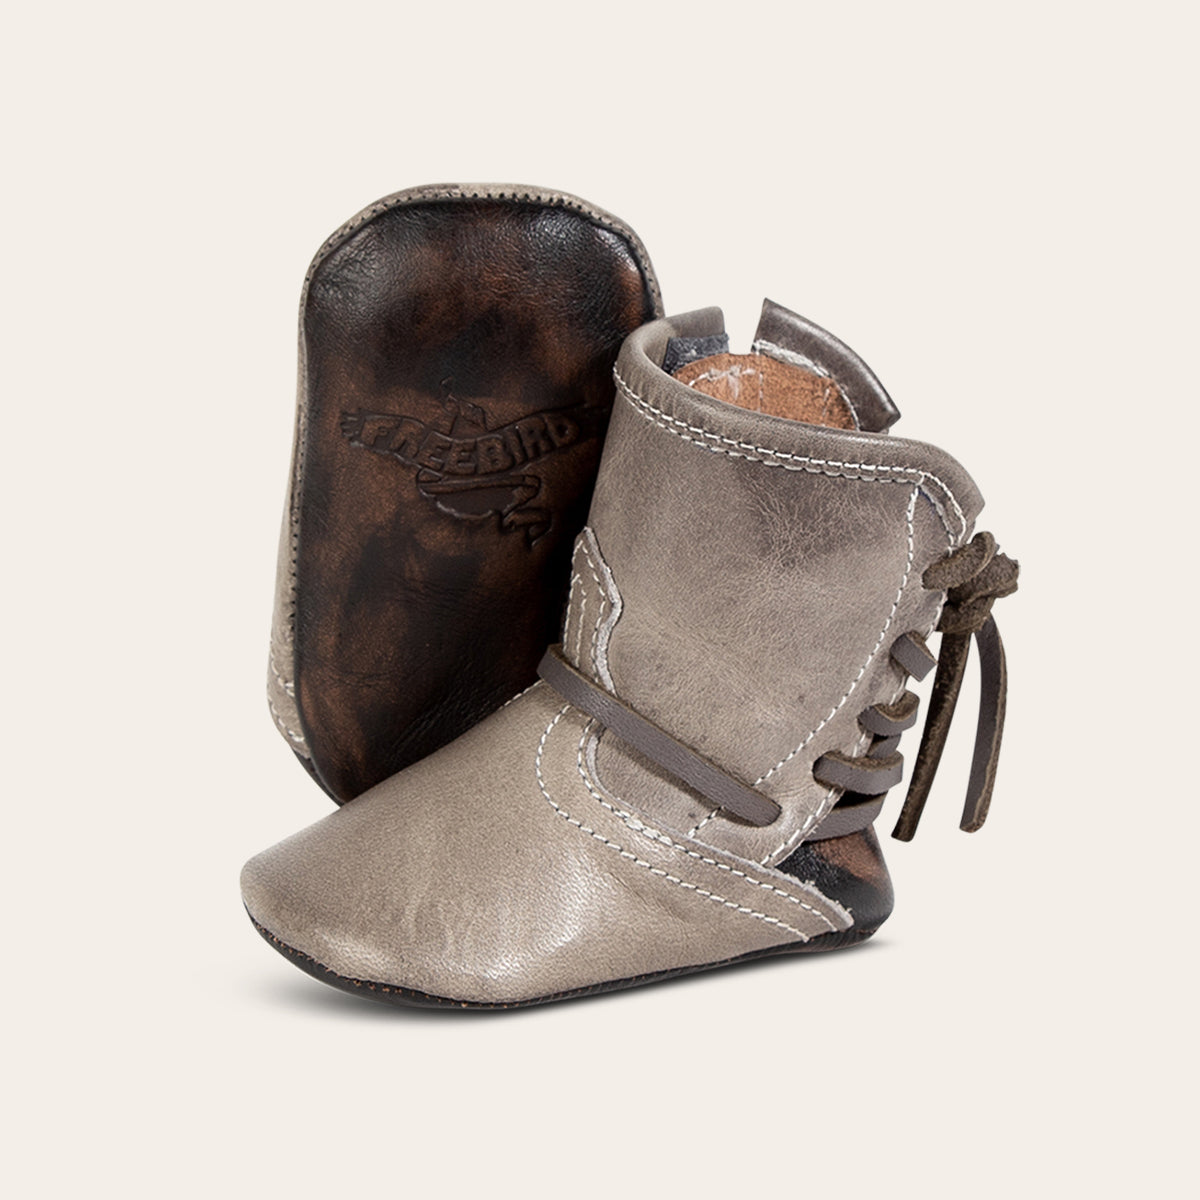 front view showing contrasting leather lace detailing and soft leather imprinted sole on FREEBIRD infant baby coal stone leather bootie 